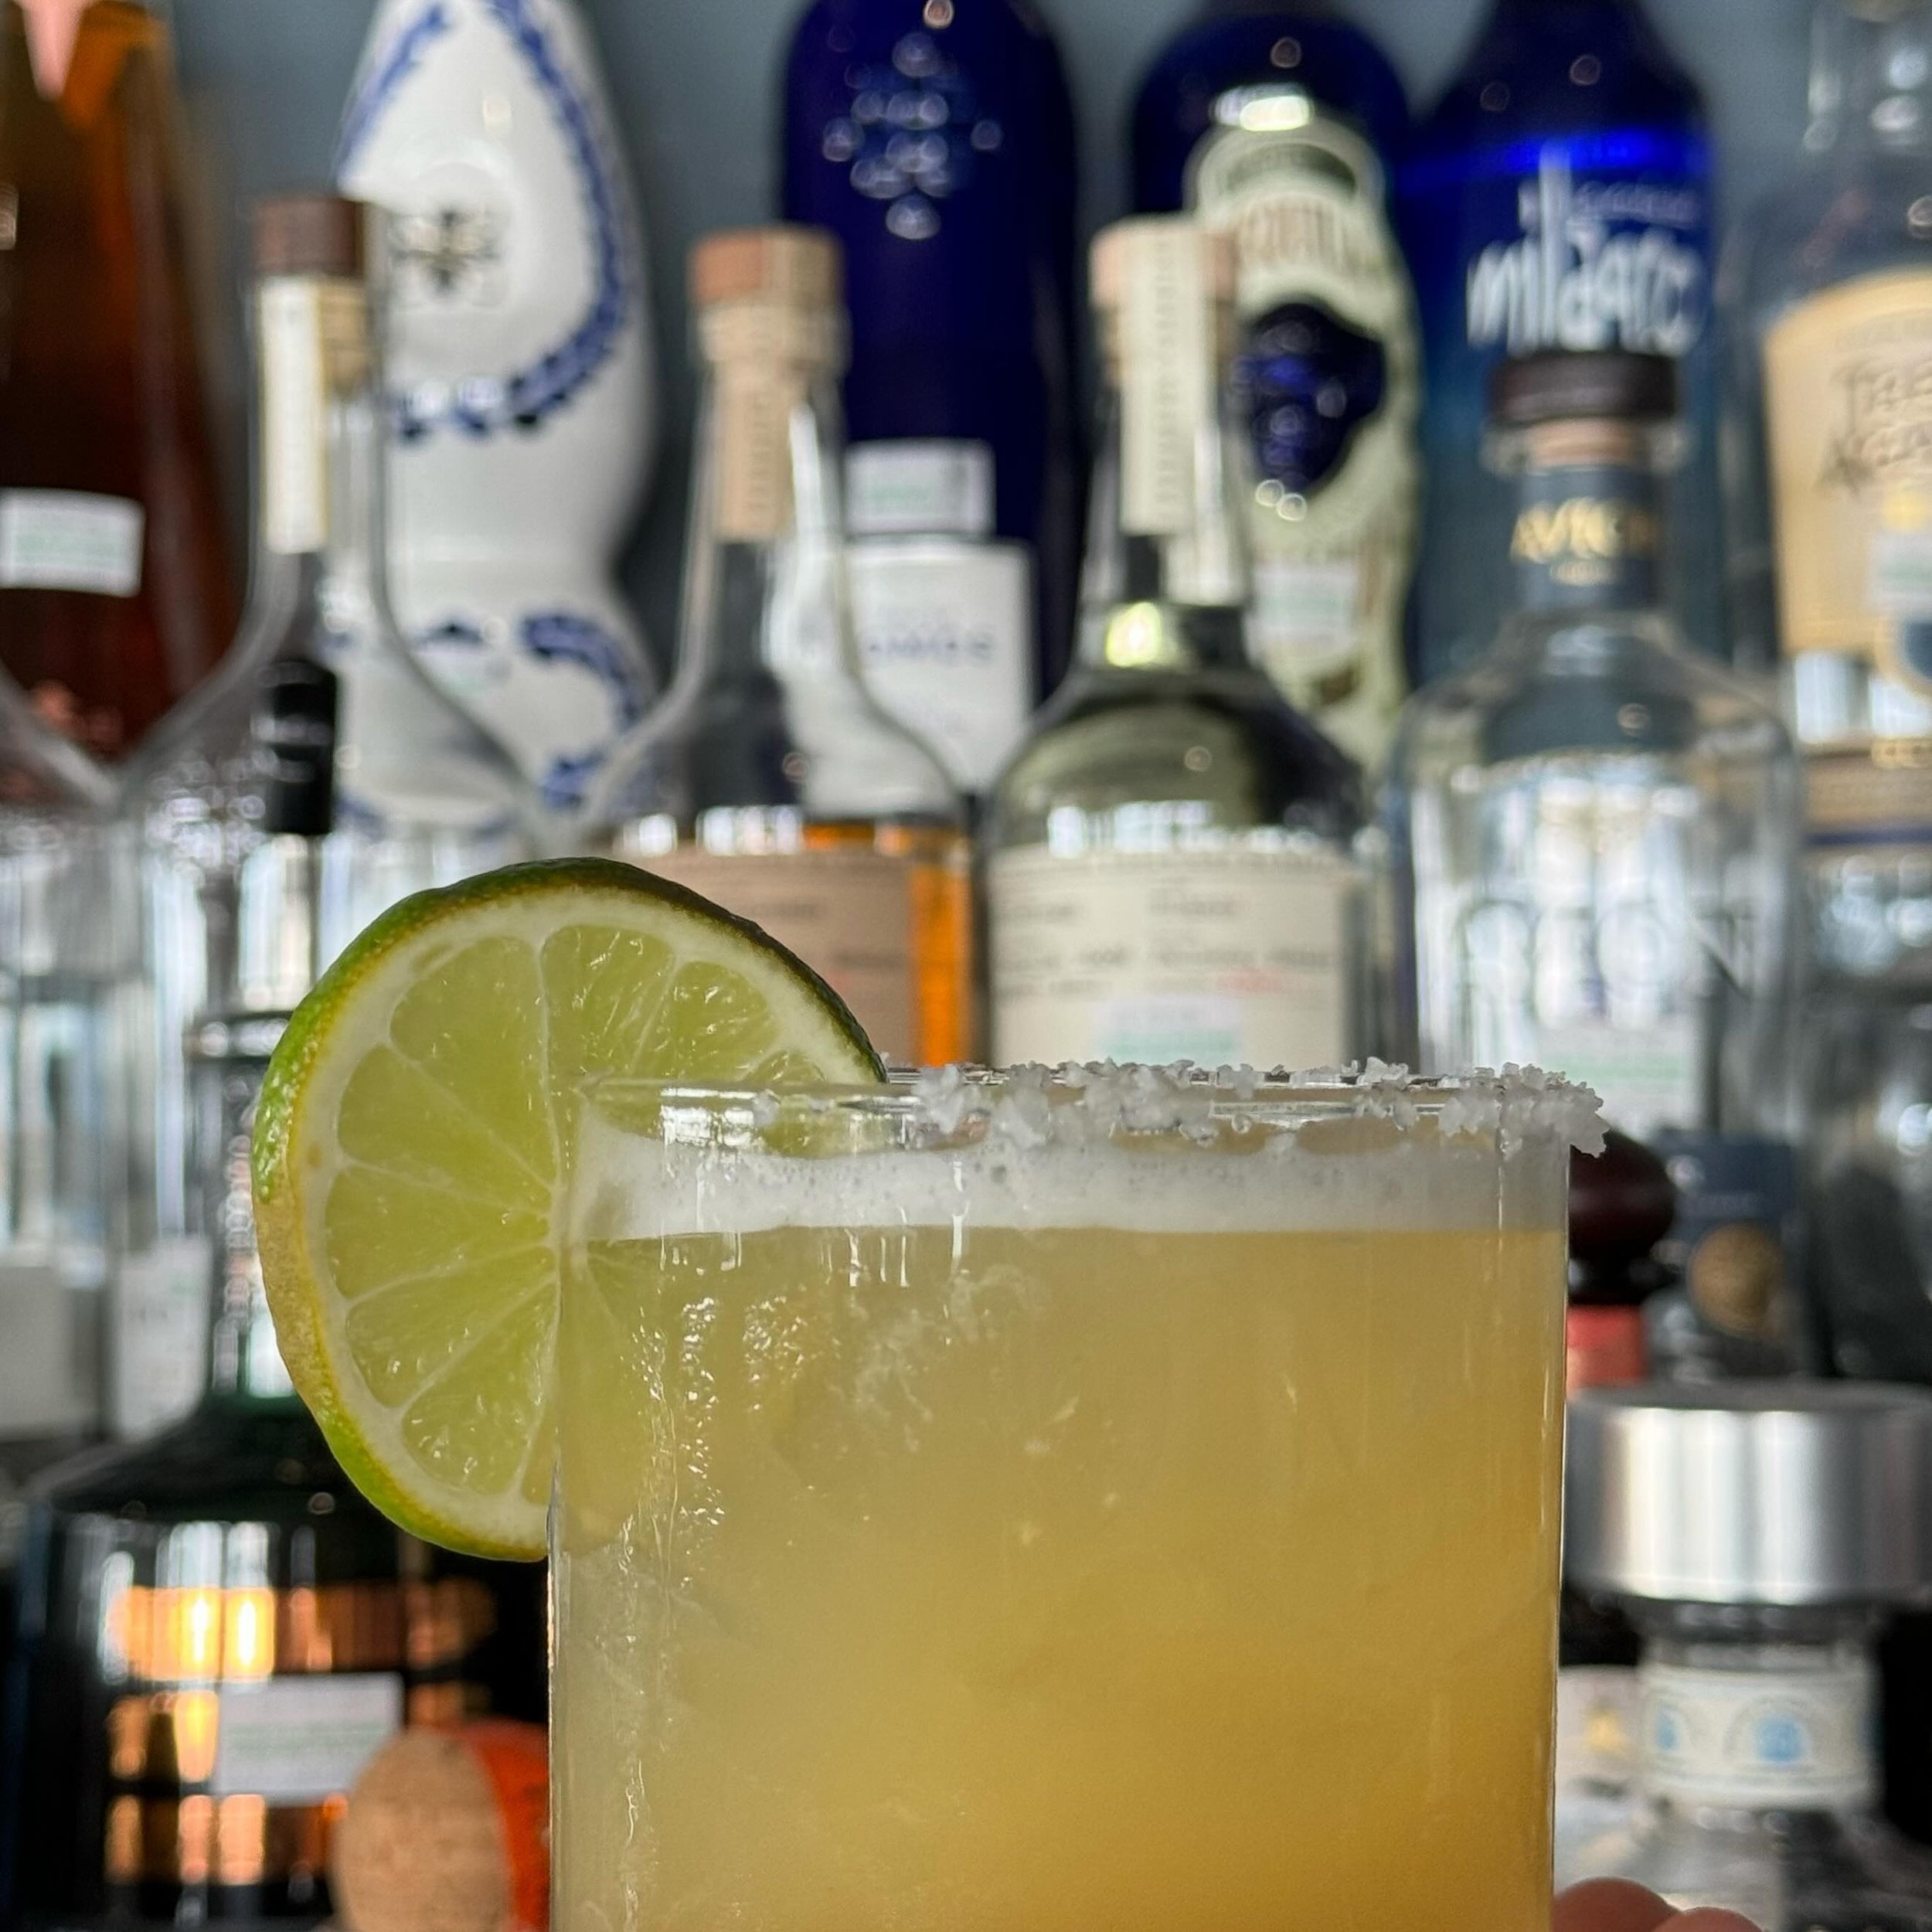 Tonight might just be the perfect night to try a Village classic. Our house margarita has been a customer favorite since we opened. With Cazadores reposado, house smoked simple syrup, and a Grand Marnier float it&rsquo;s anything but ordinary. Cheers